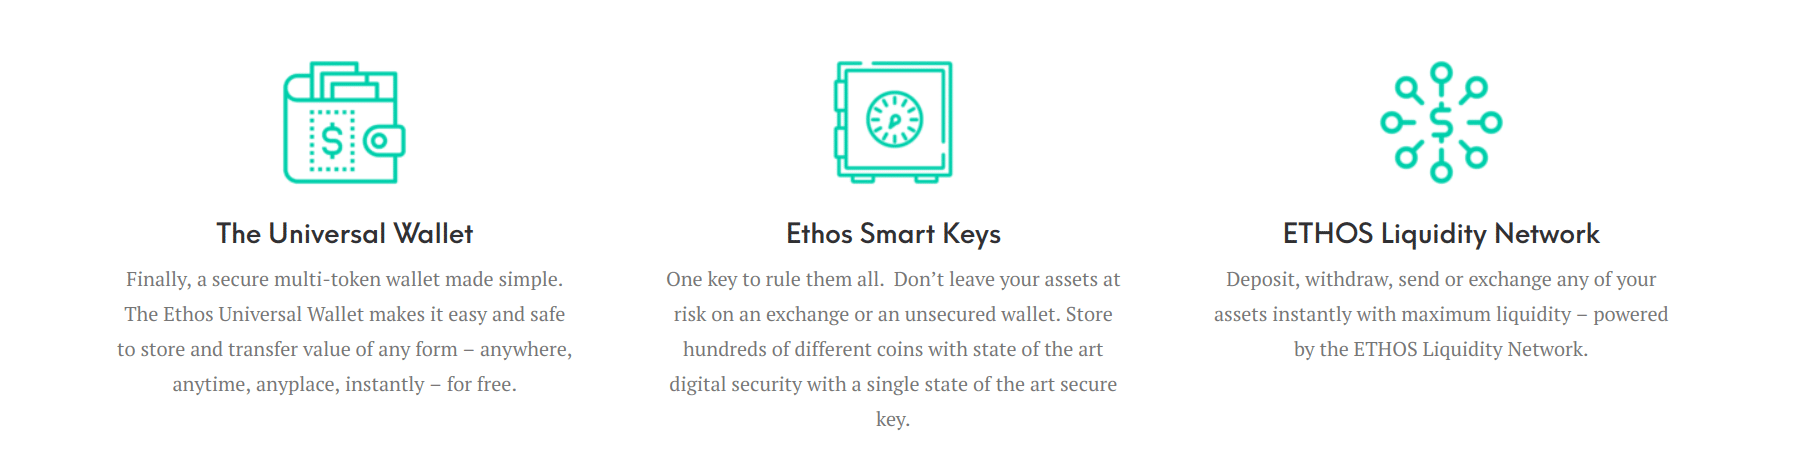 core features of ethos